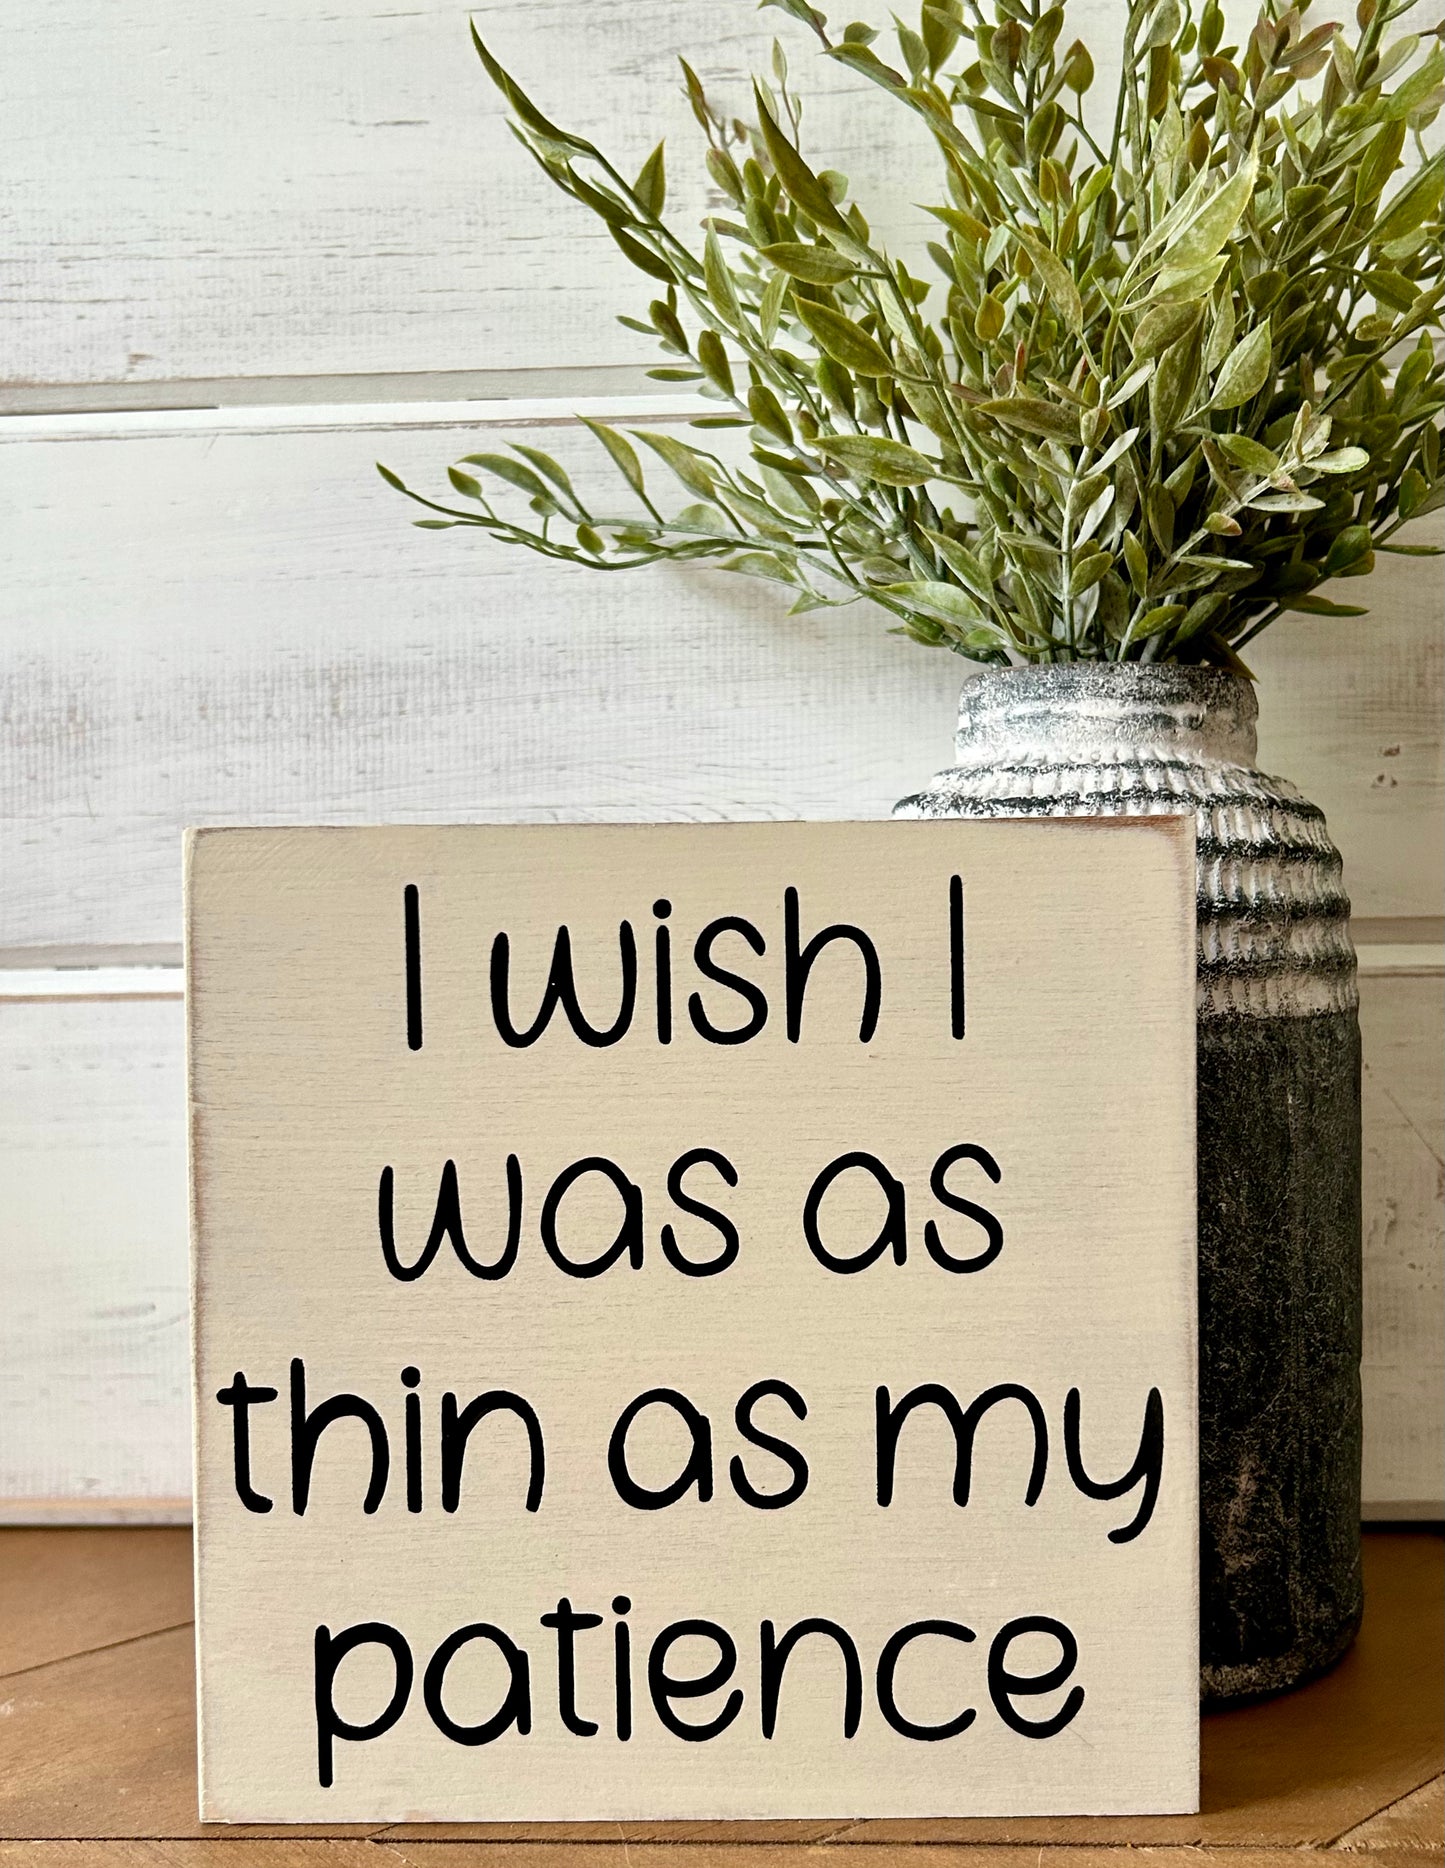 I Wish I Was as Thin as my Patience - Funny Rustic Wood Sign